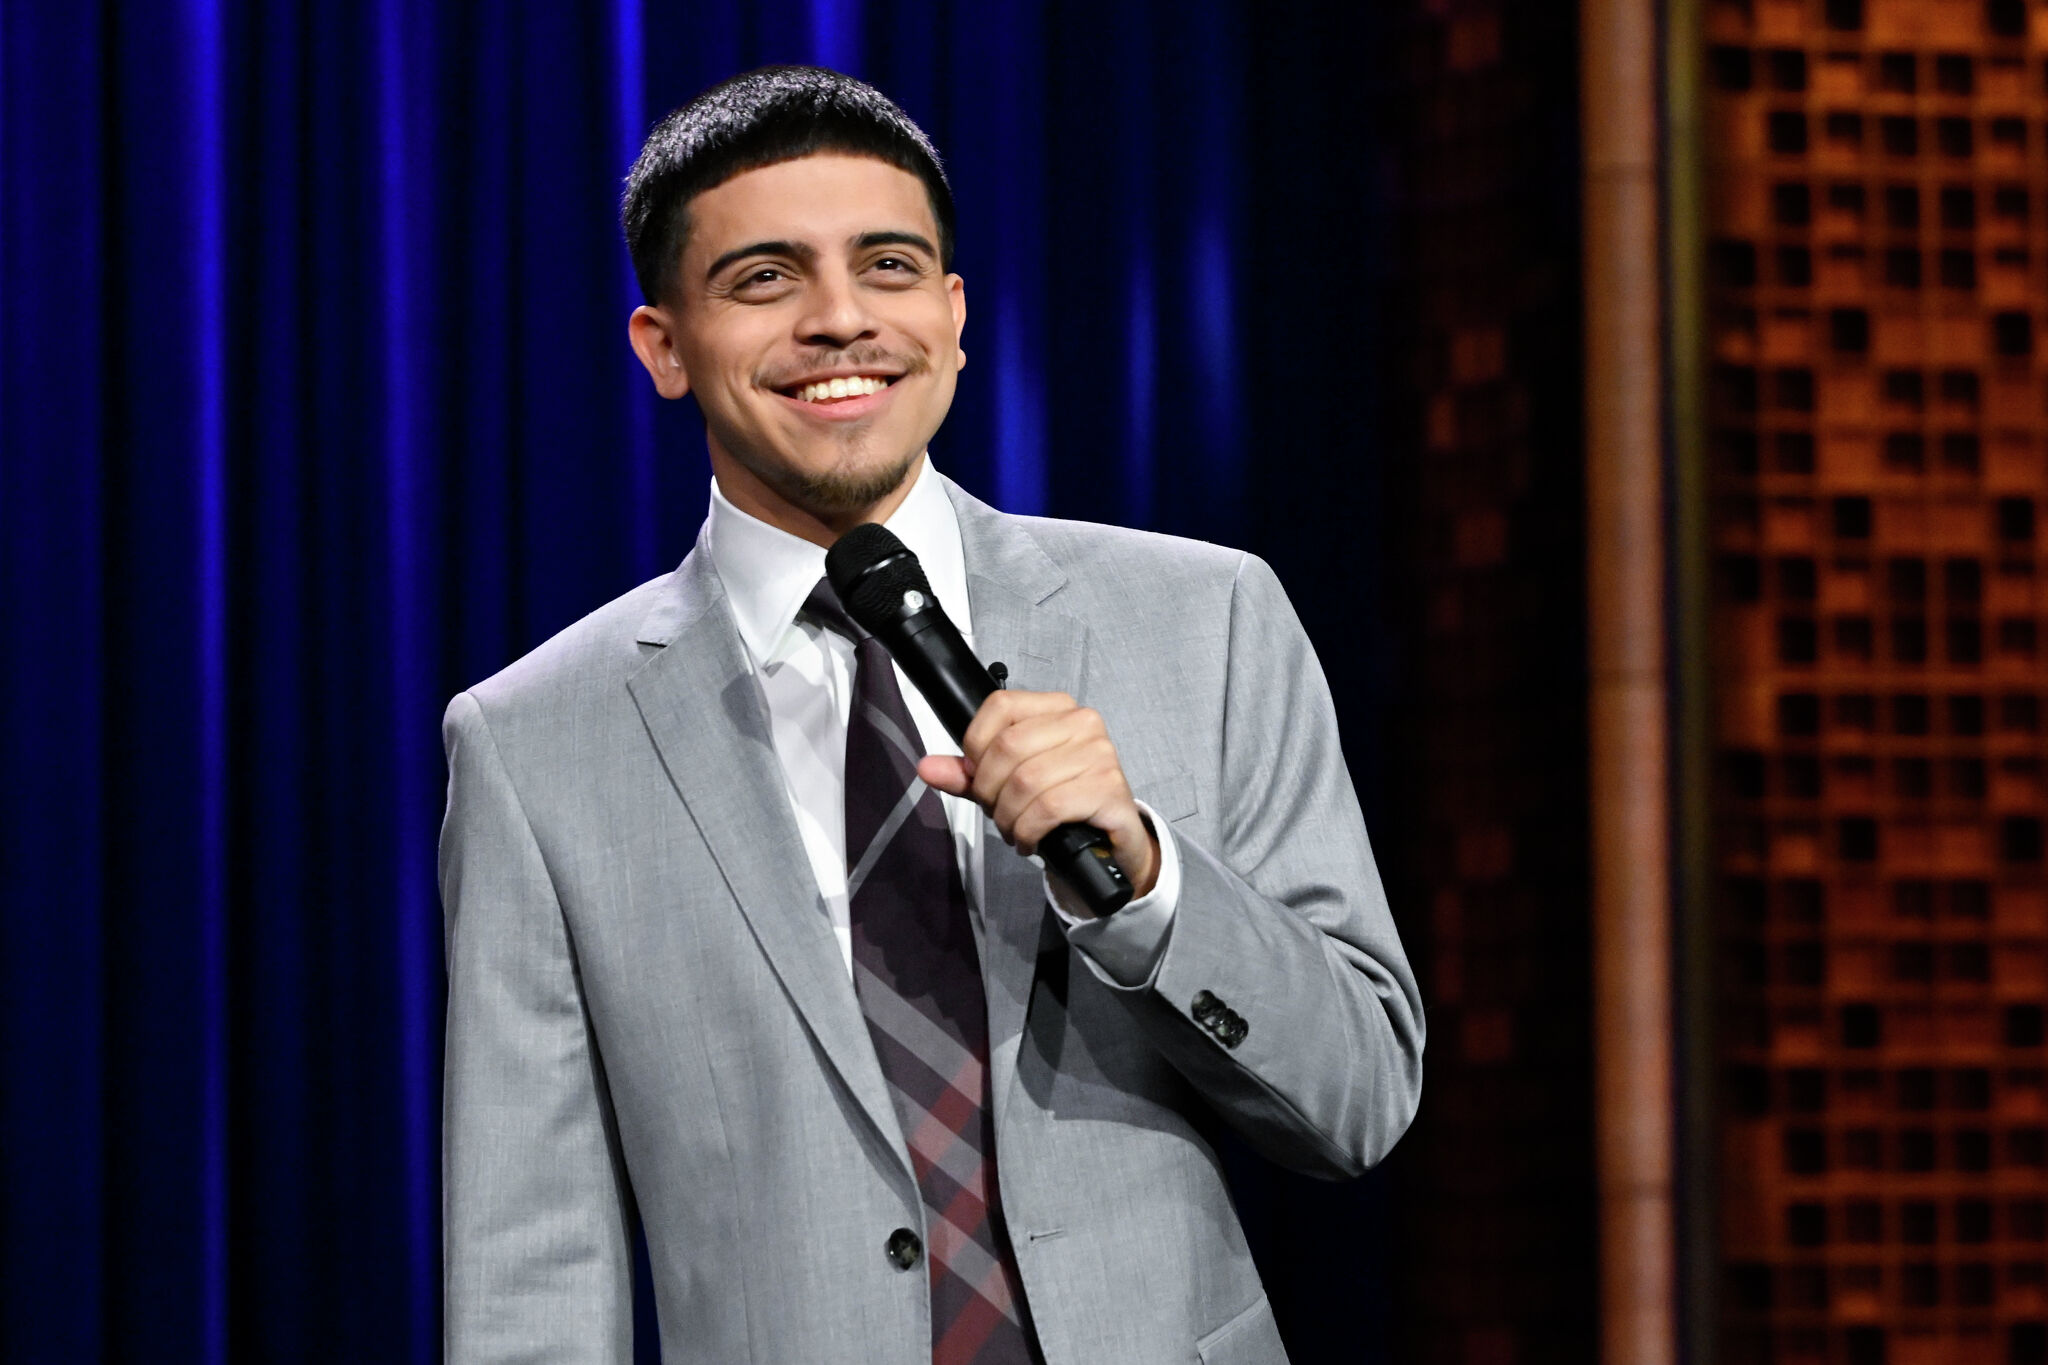 Ralph Barbosa performs stand-up comedy on 'Tonight Show'